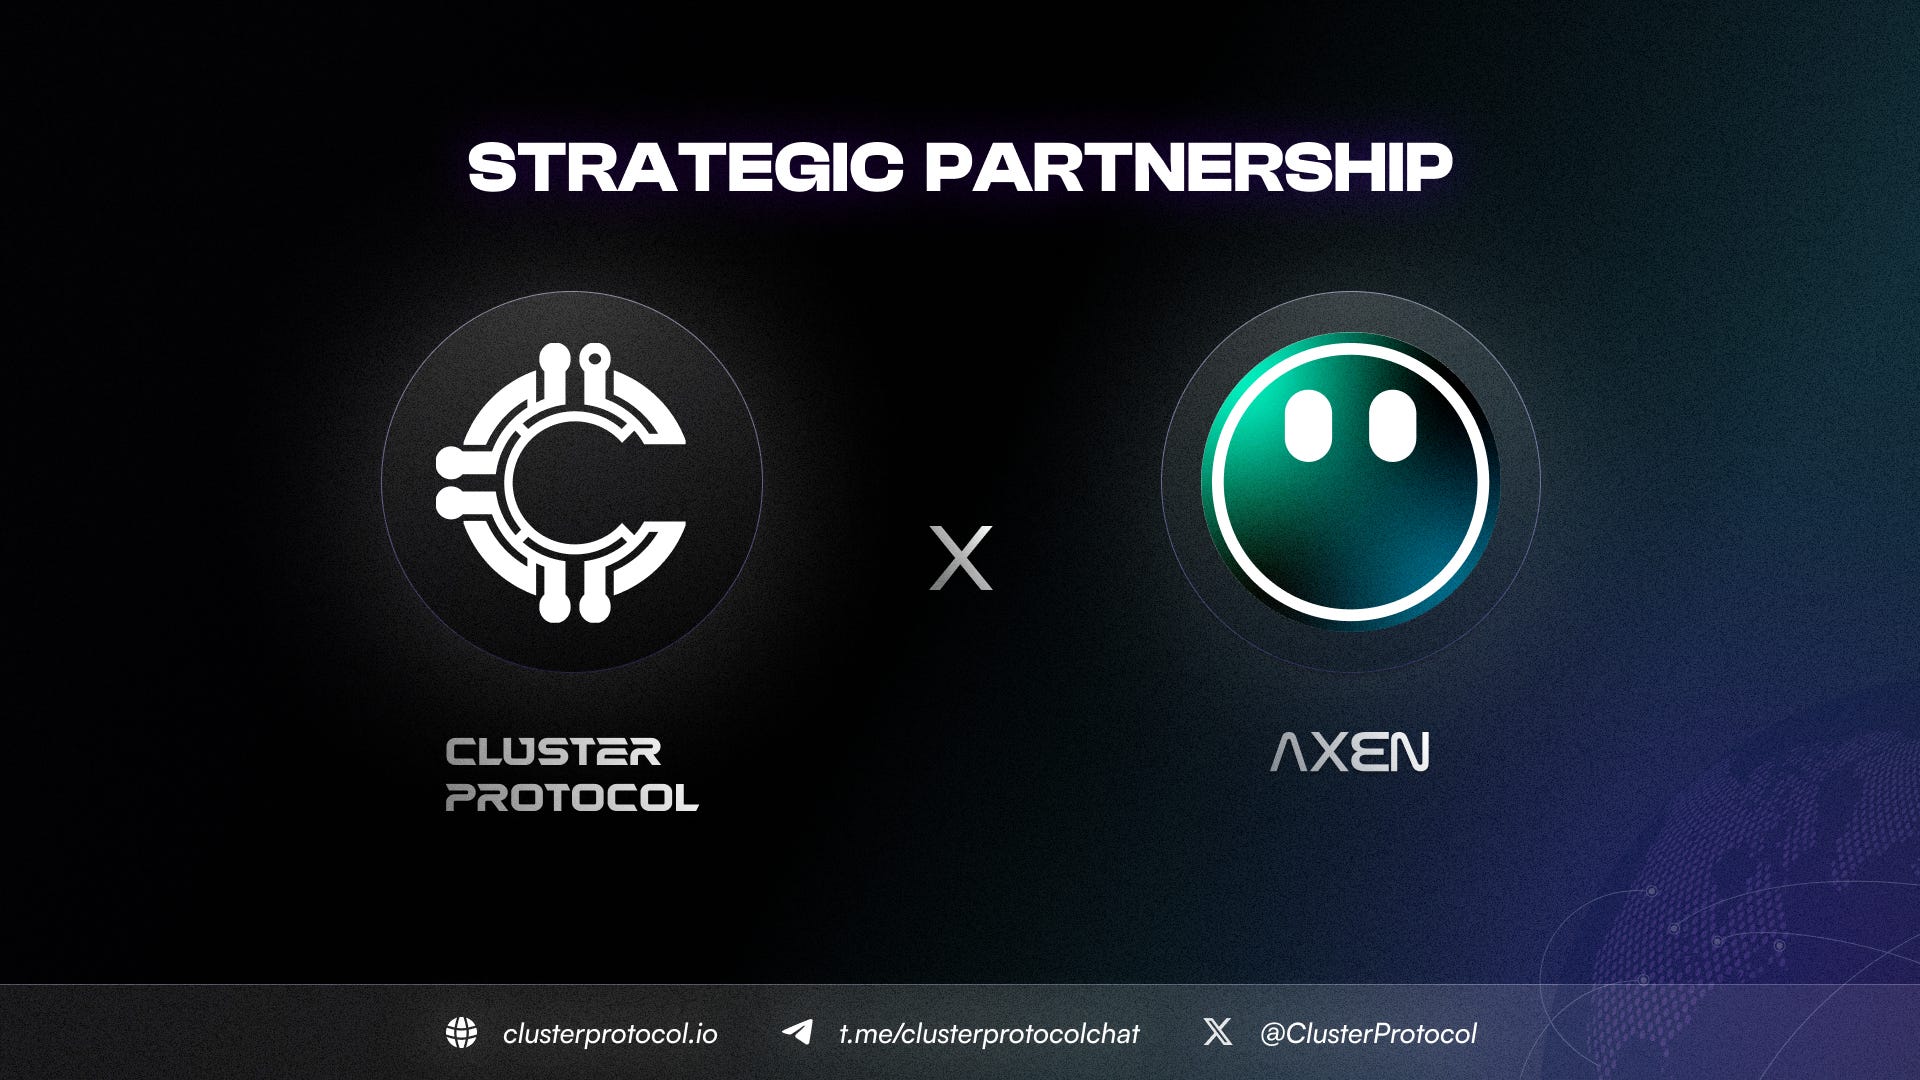 Cluster Protocol announces its strategic partnership with Axen Labs